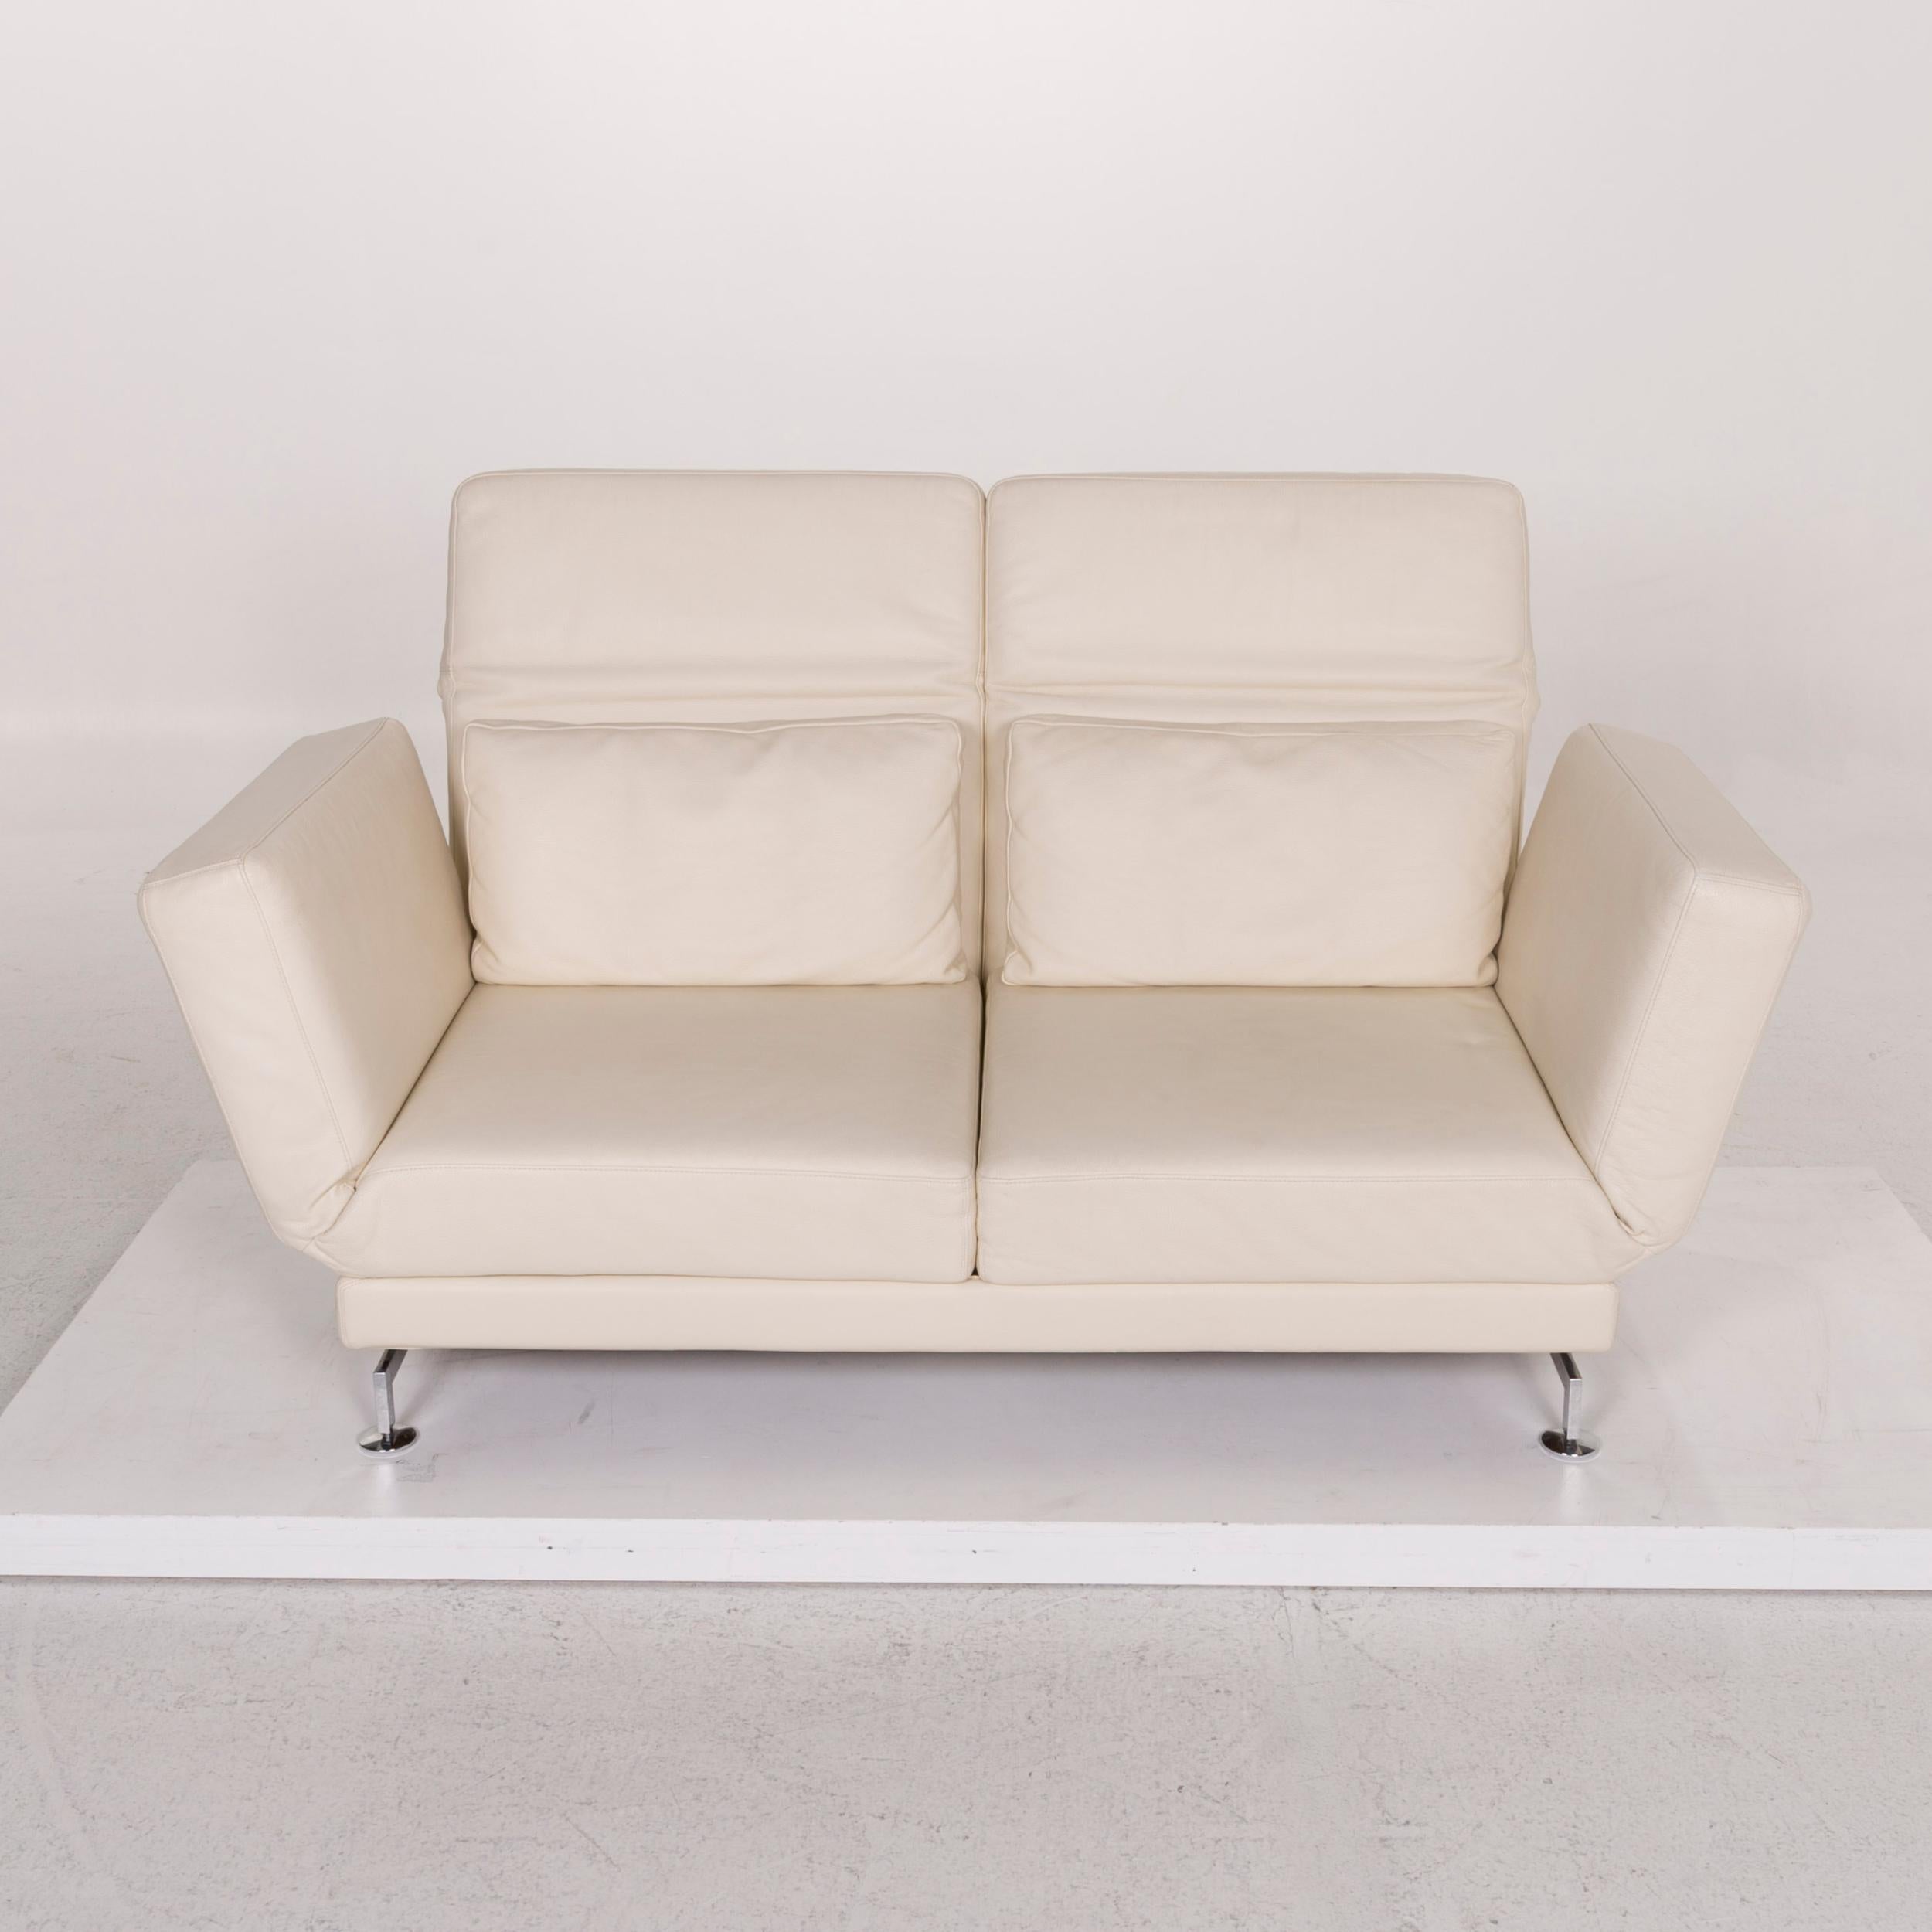 Brühl & Sippold Moule Leather Sofa Cream Two-Seat For Sale 2